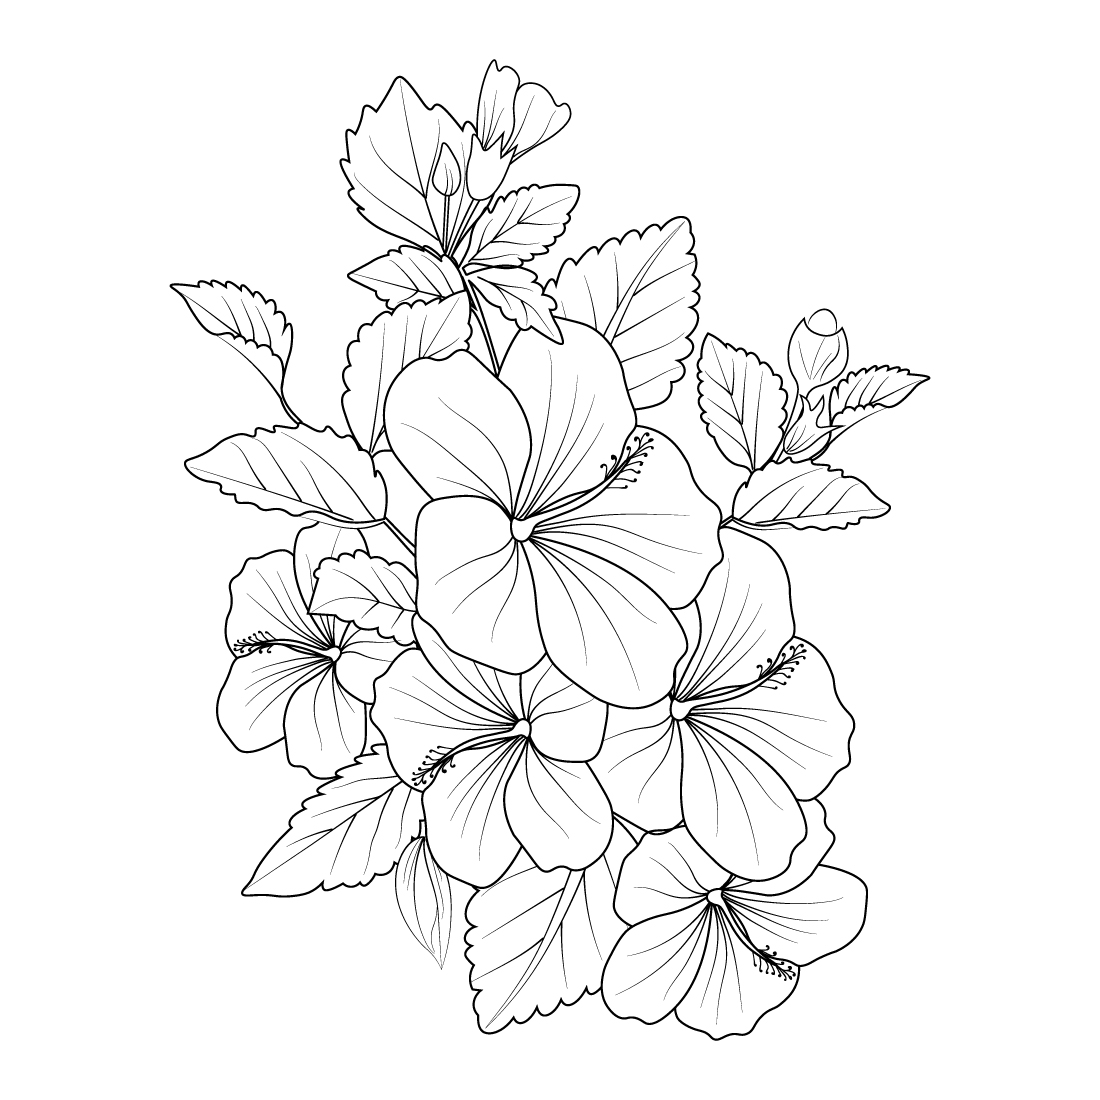 Hibiscus isolated, hand-drawn floral element vector illustration bouquet or china rose, preview image.